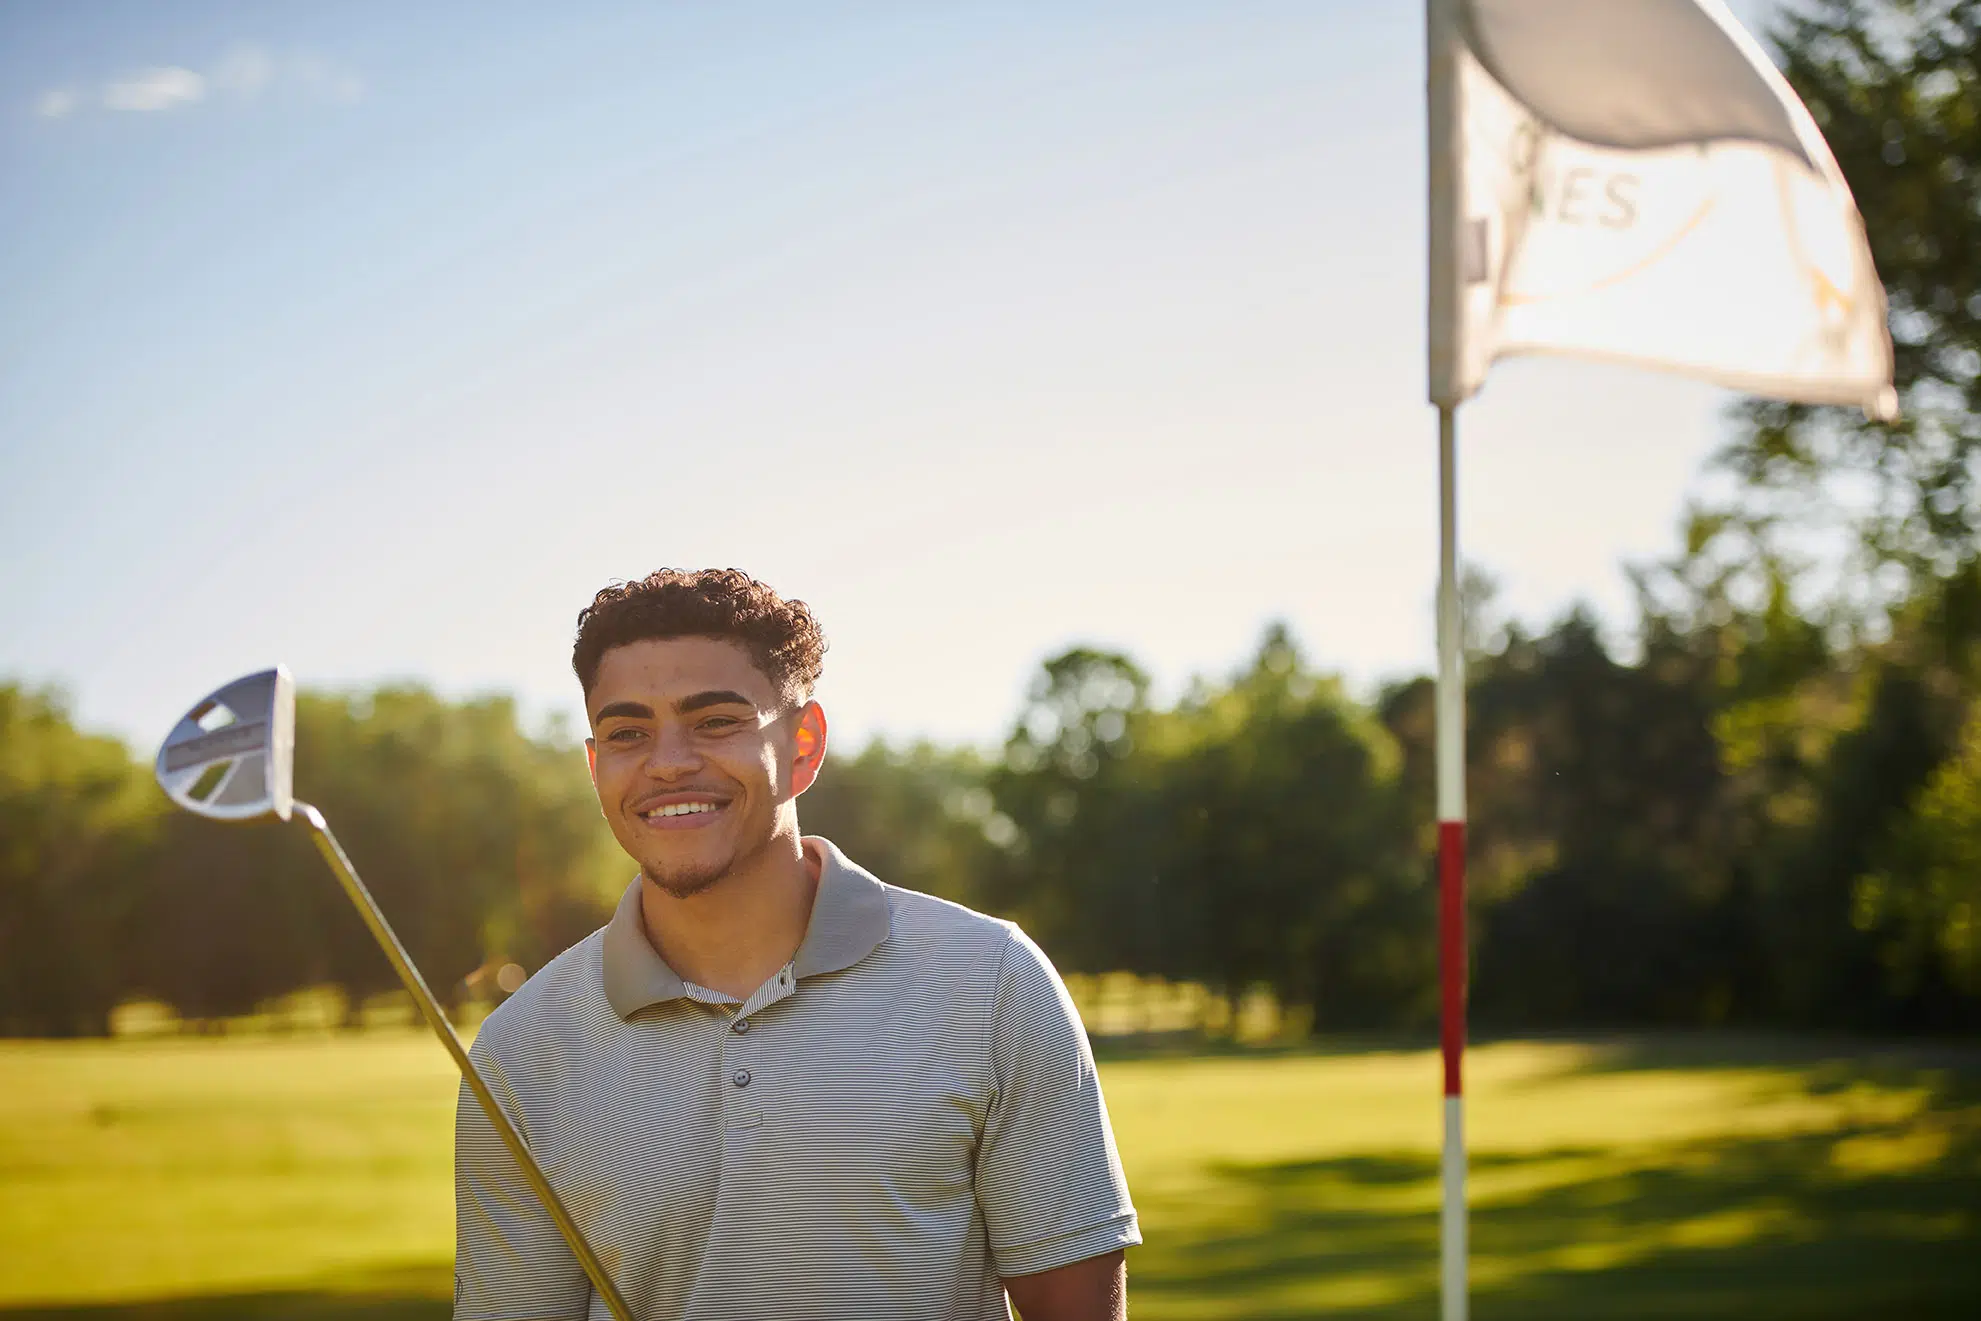 Candid image of young male golfer on green